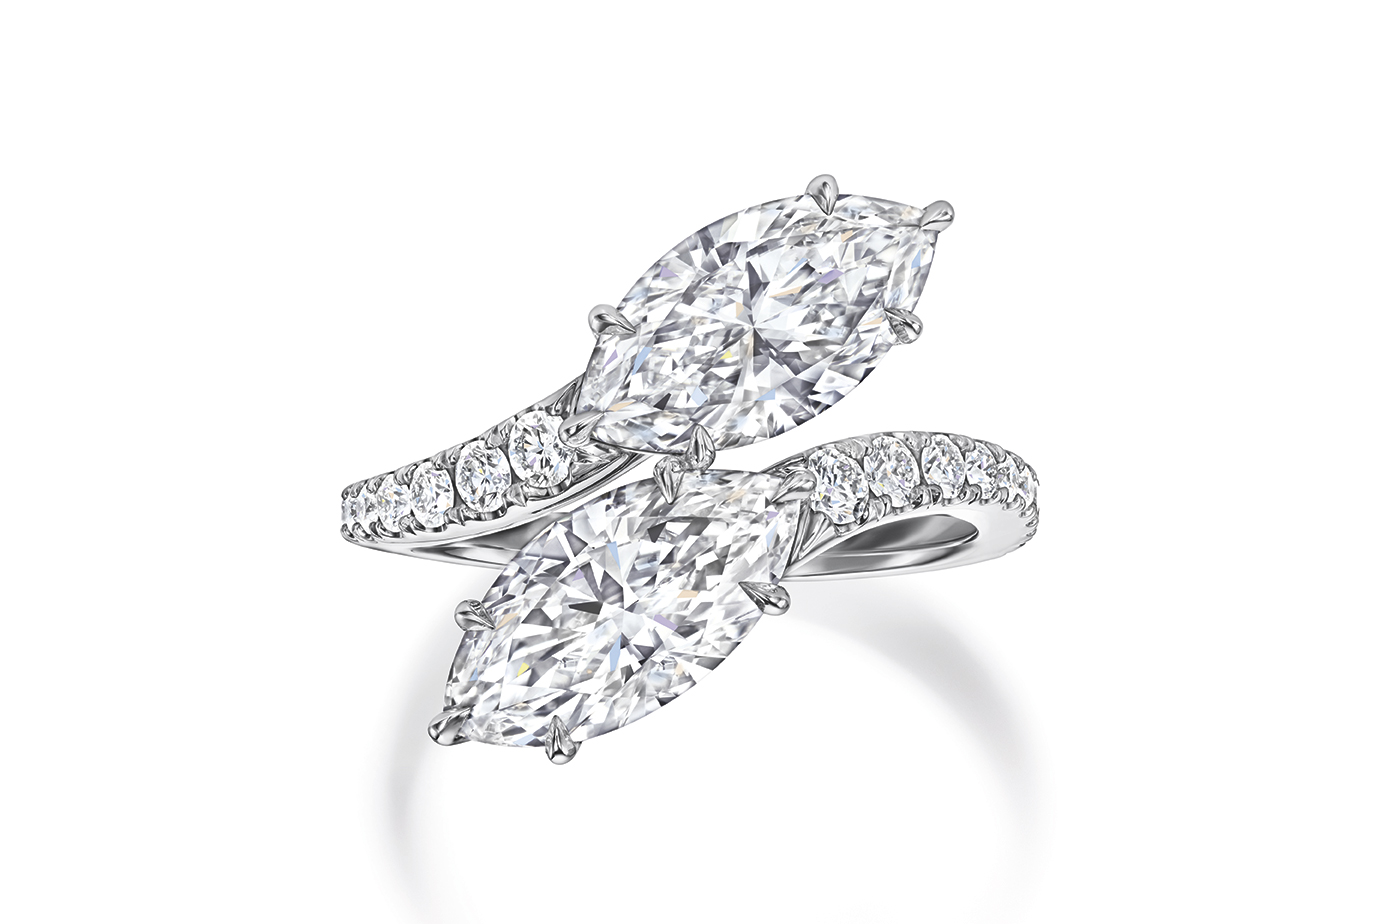 Unique diamond engagement rings by Harry Winston